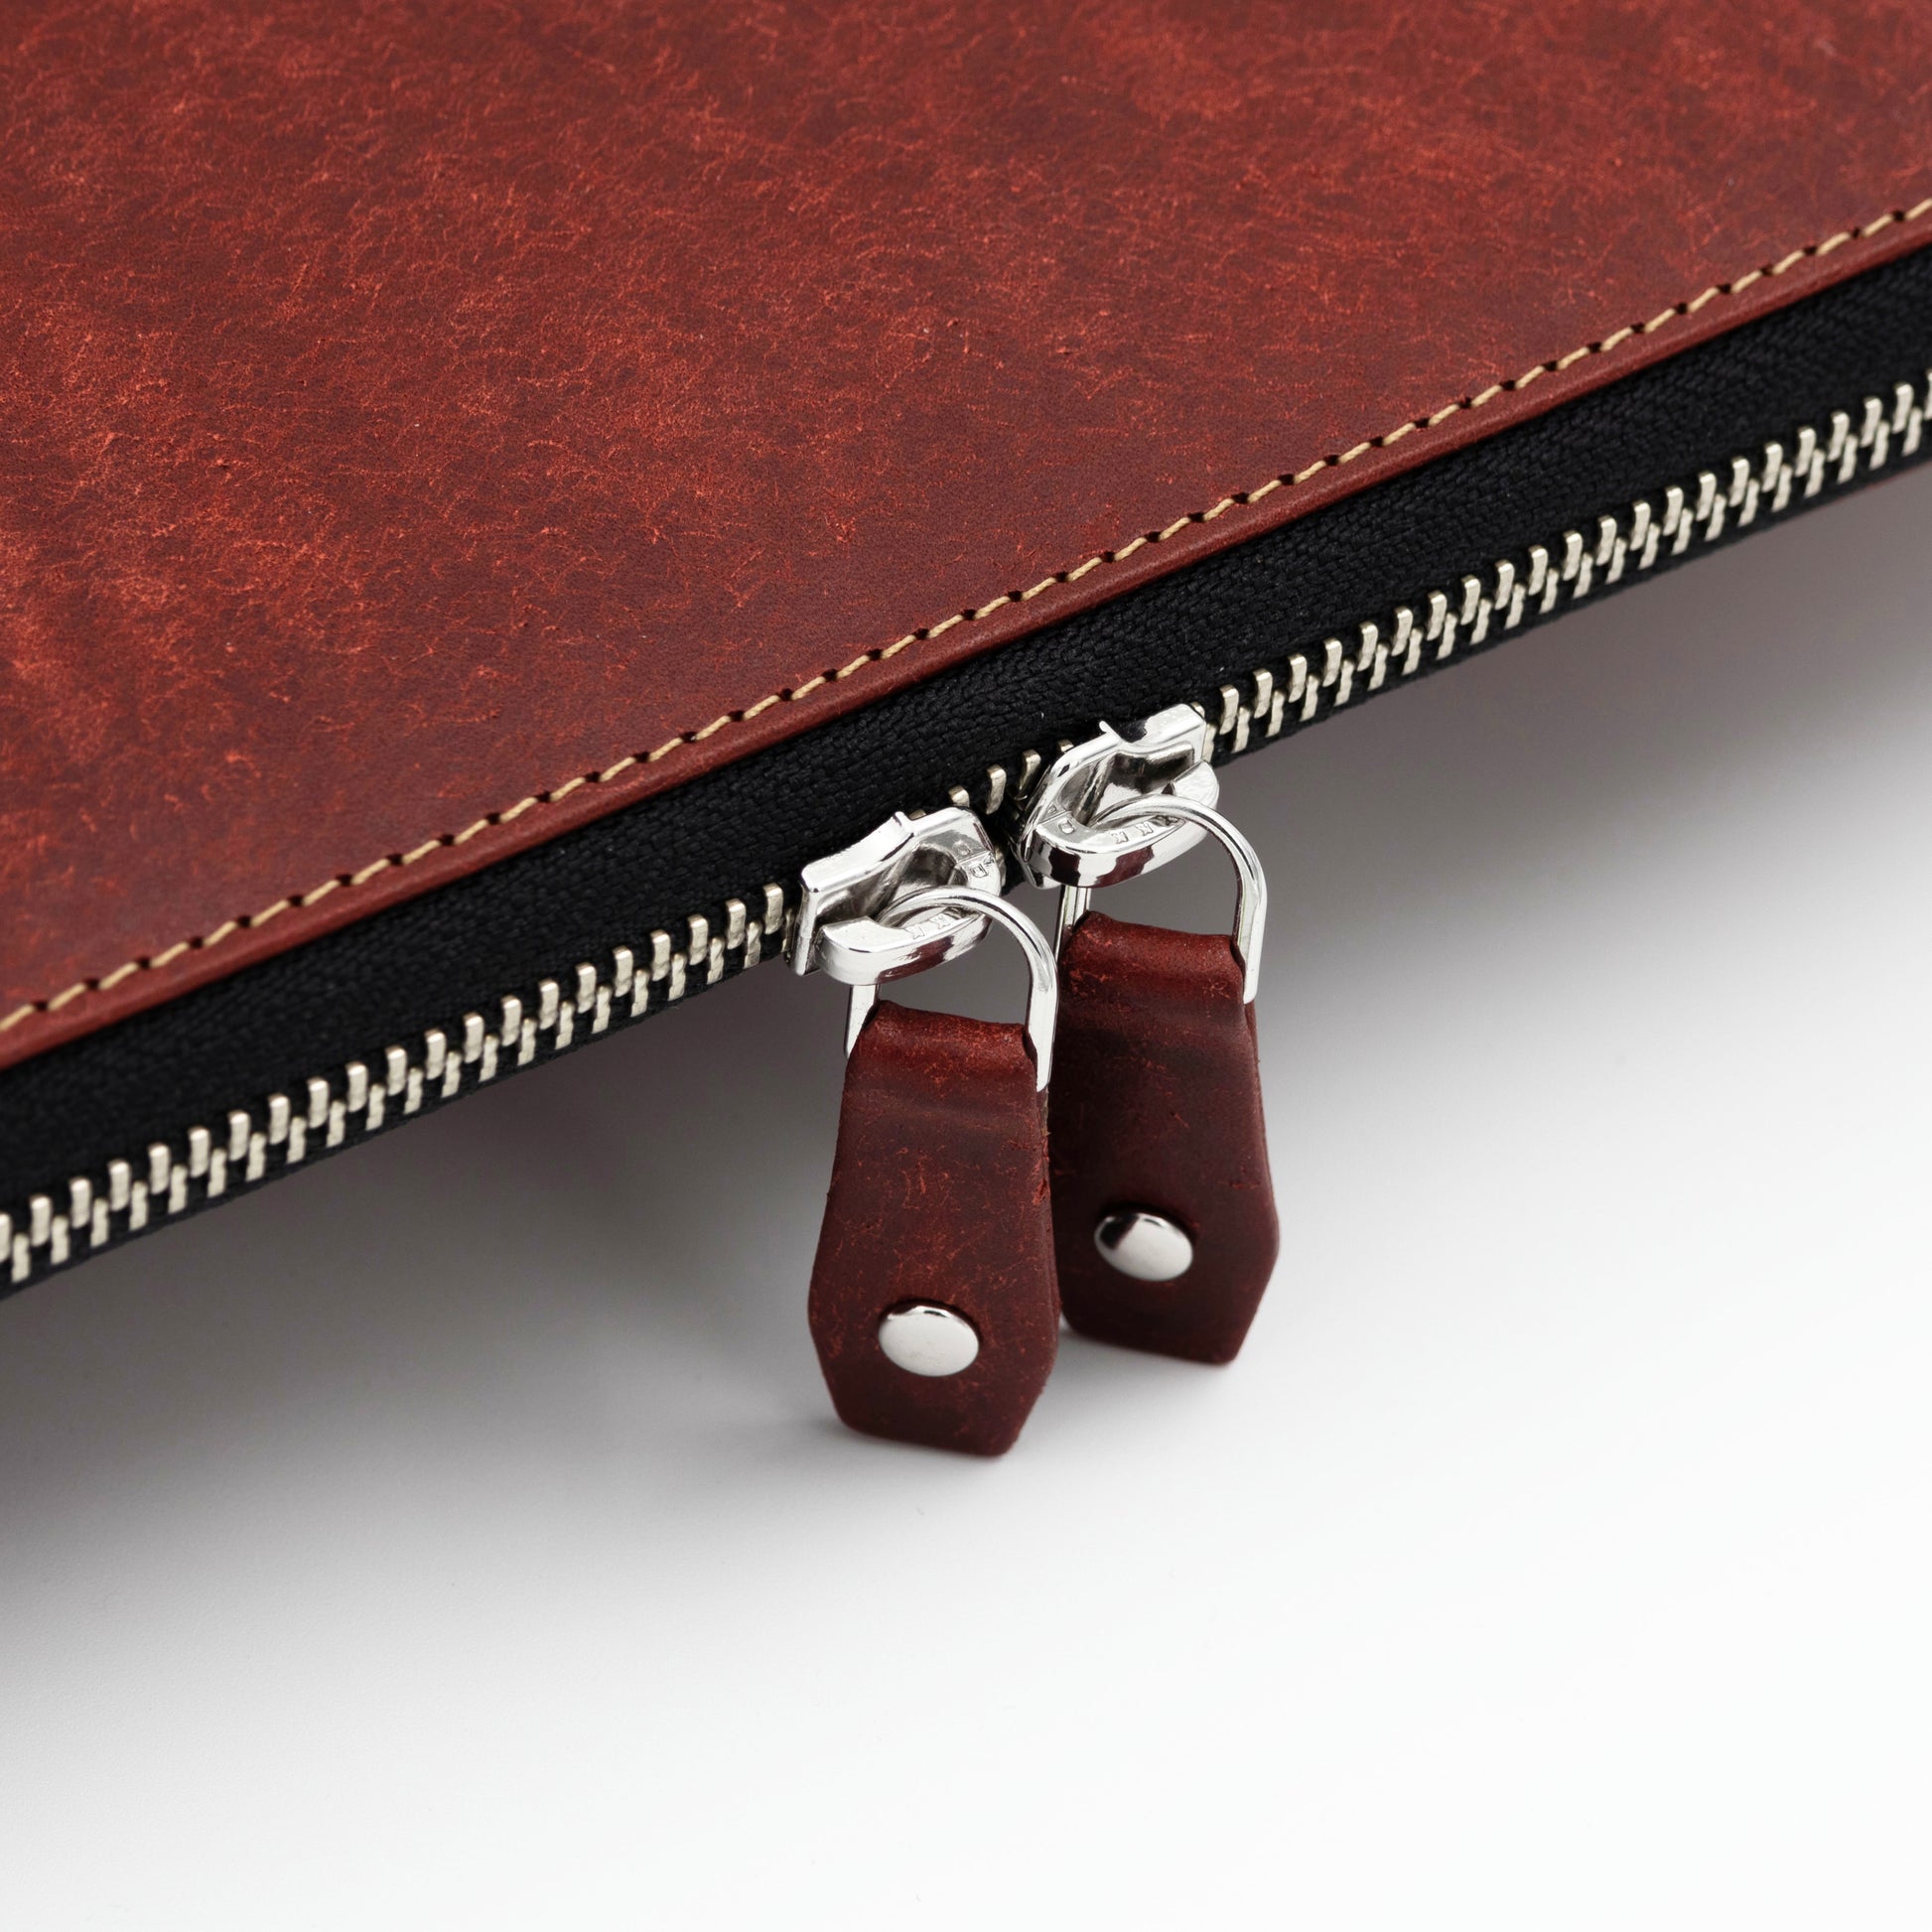 The leather laptop case is designed with YKK zippers for smooth functioning and long life.